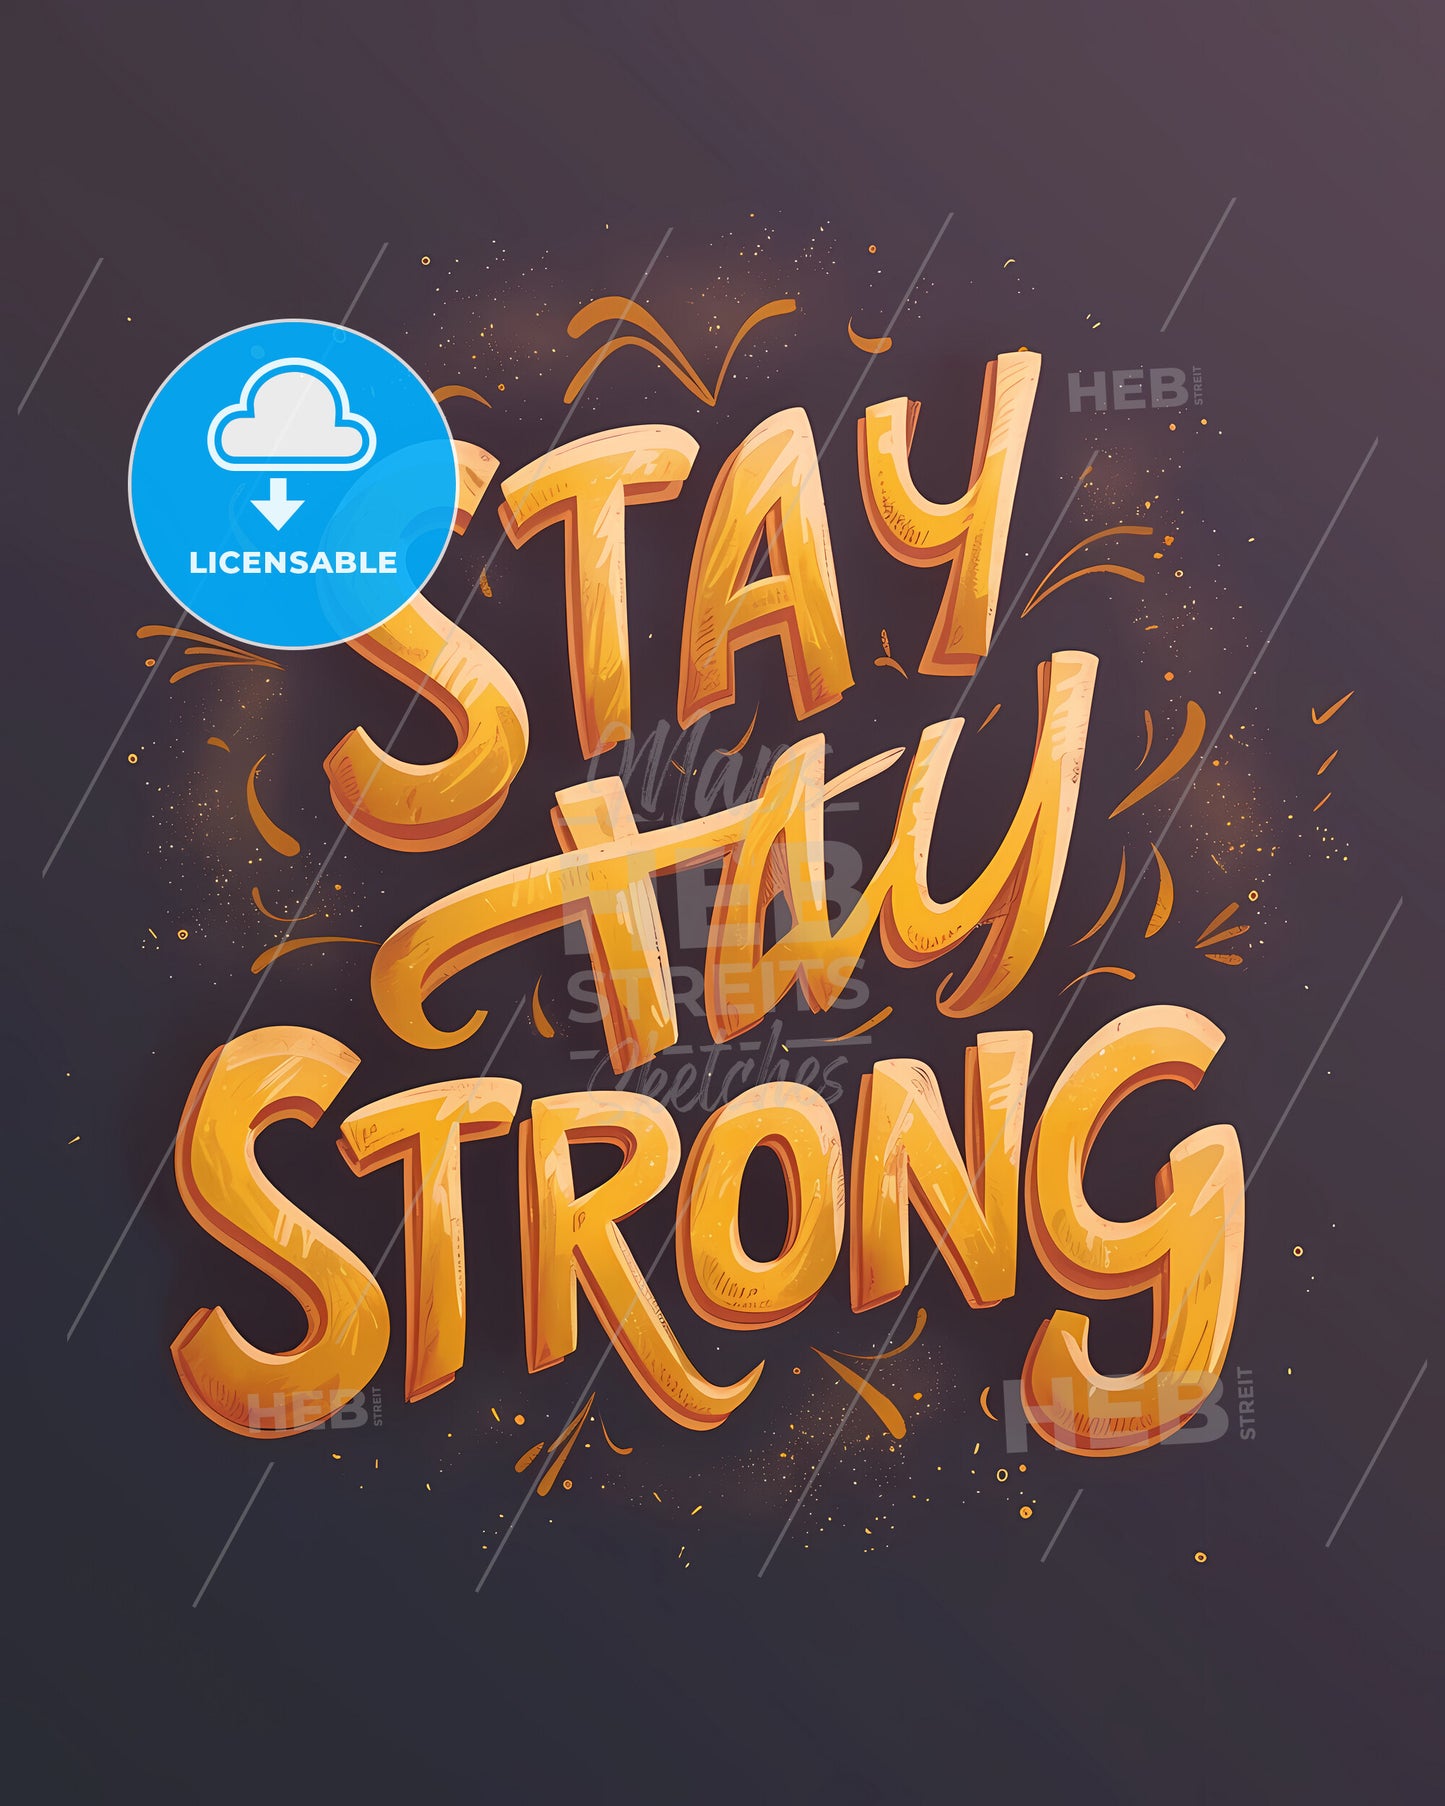 Repeated Pattern Of The Word Stay Strong In Hand-Writting Graffiti-Style - A Yellow Text On A Black Background